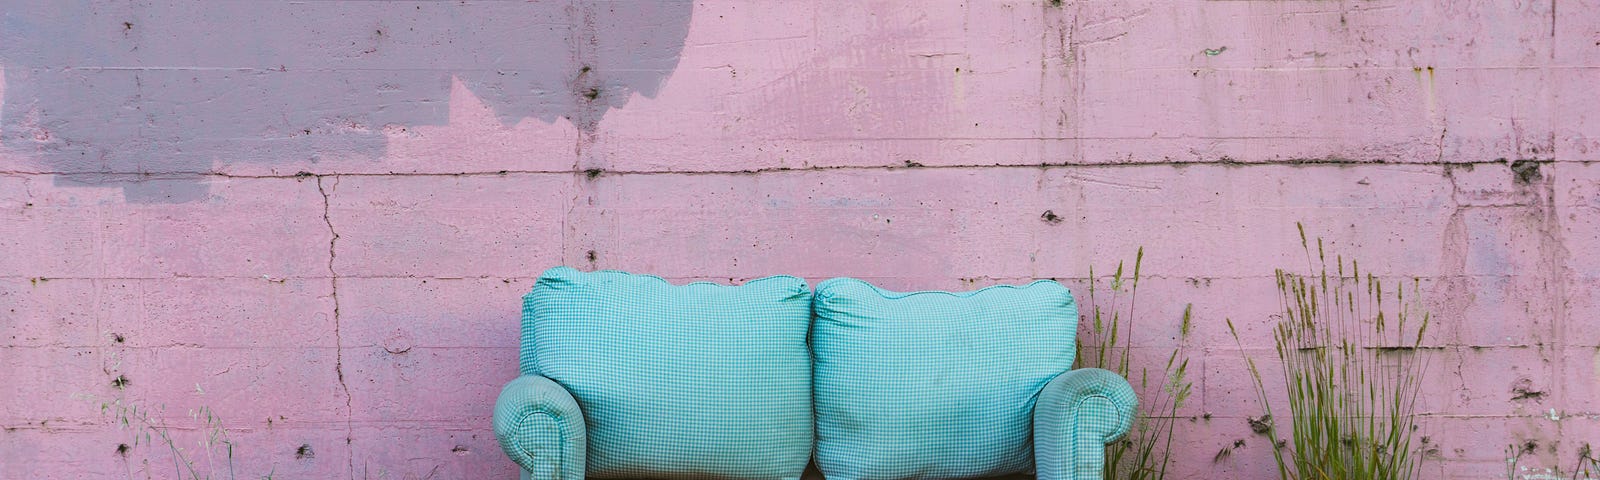 An old, broken blue sofa in front of a pink wall